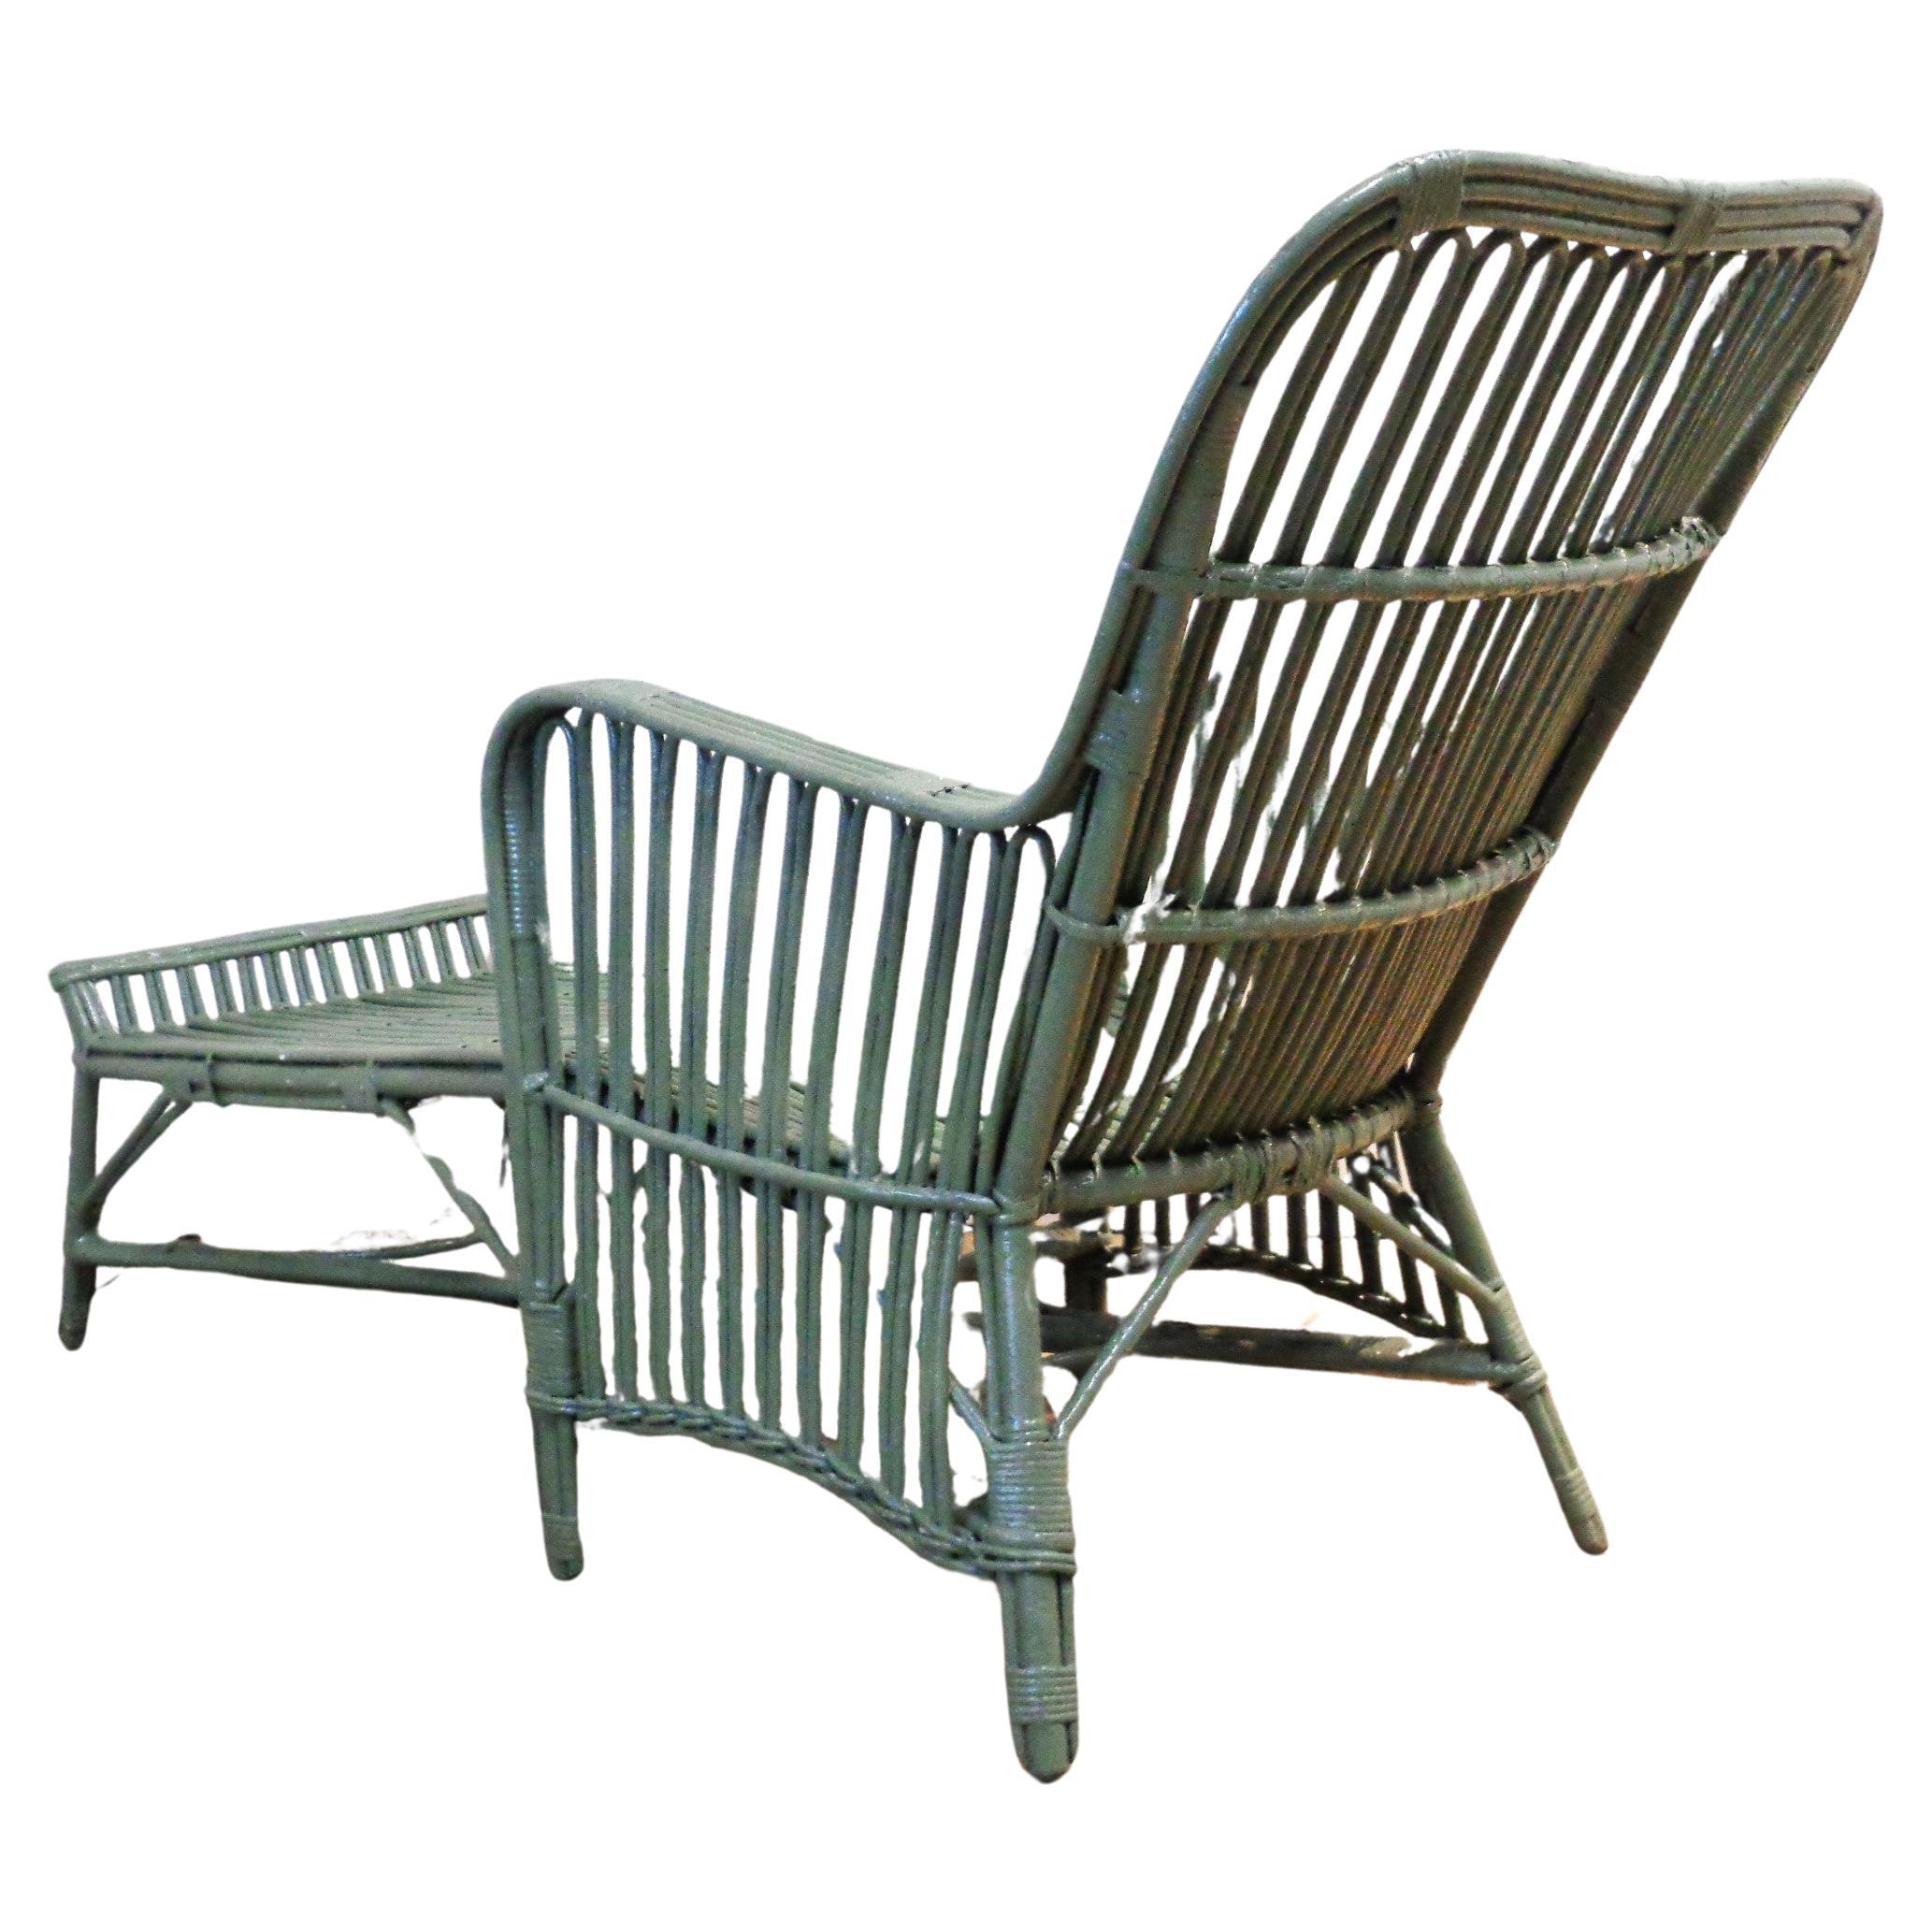 Painted Antique Stick Wicker Chaise Lounge Heywood-Wakefield Attributed Circa 1930 For Sale